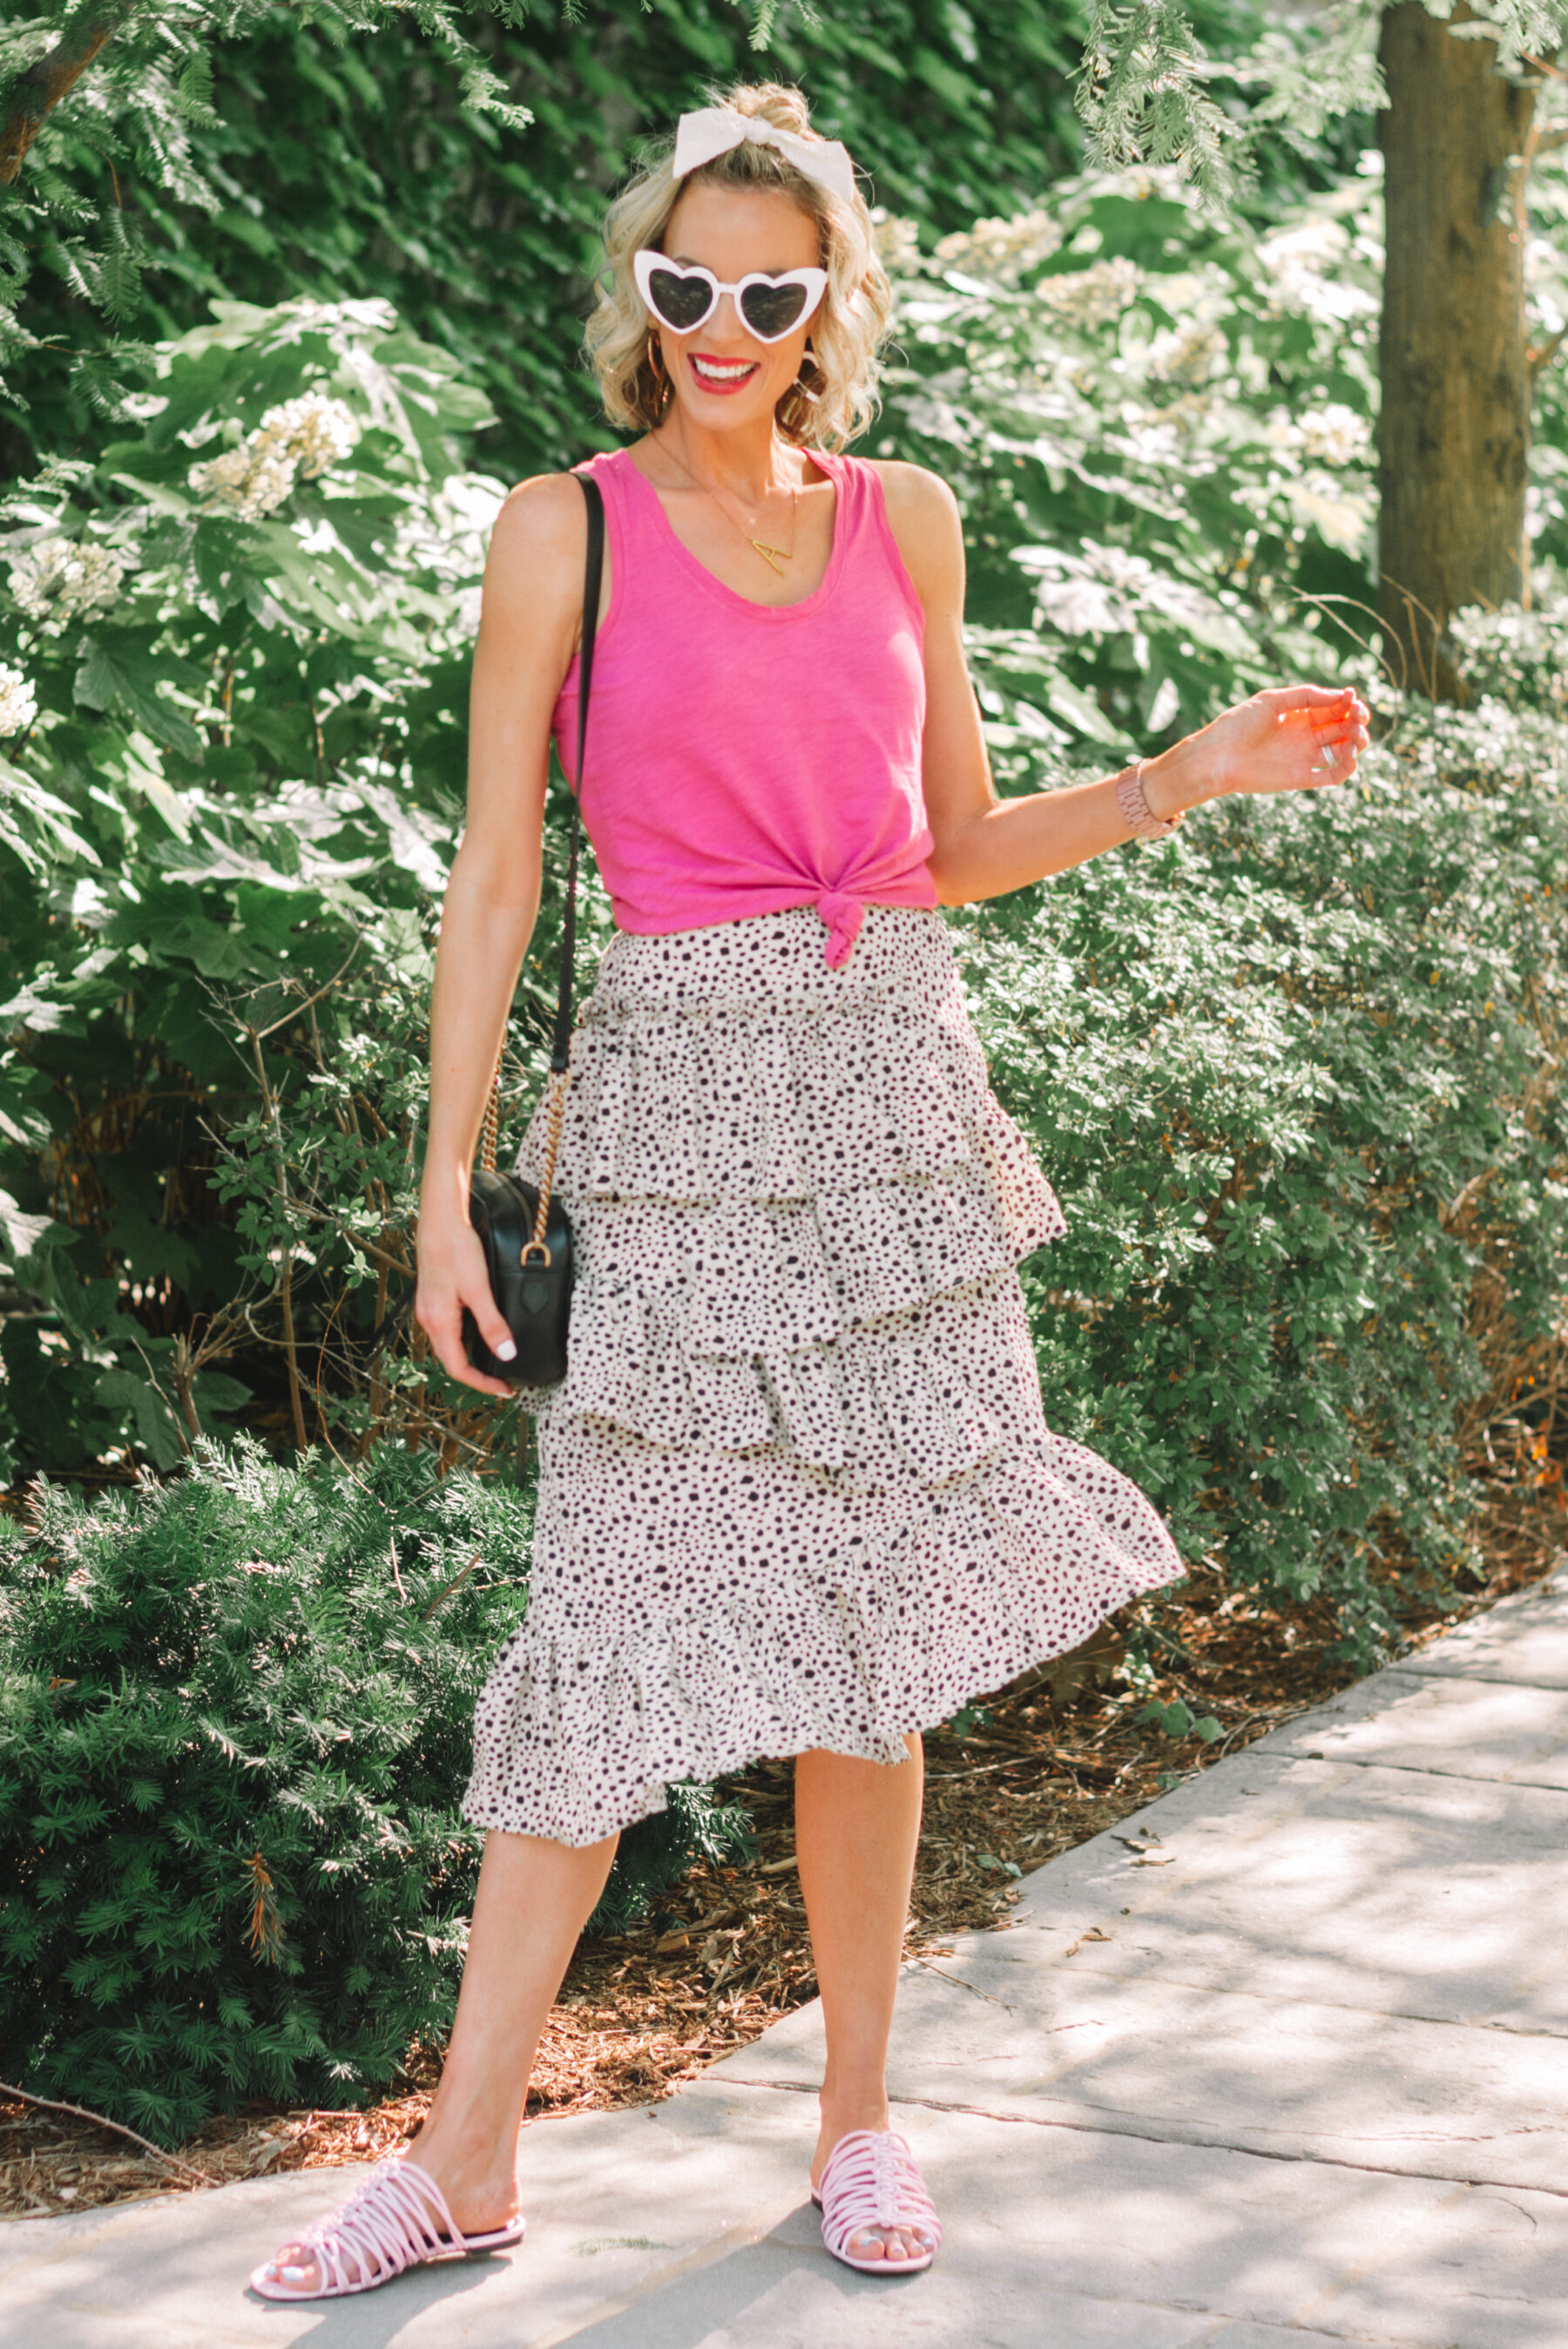 MIDI SKIRT COLLECTION & OUTFIT IDEAS